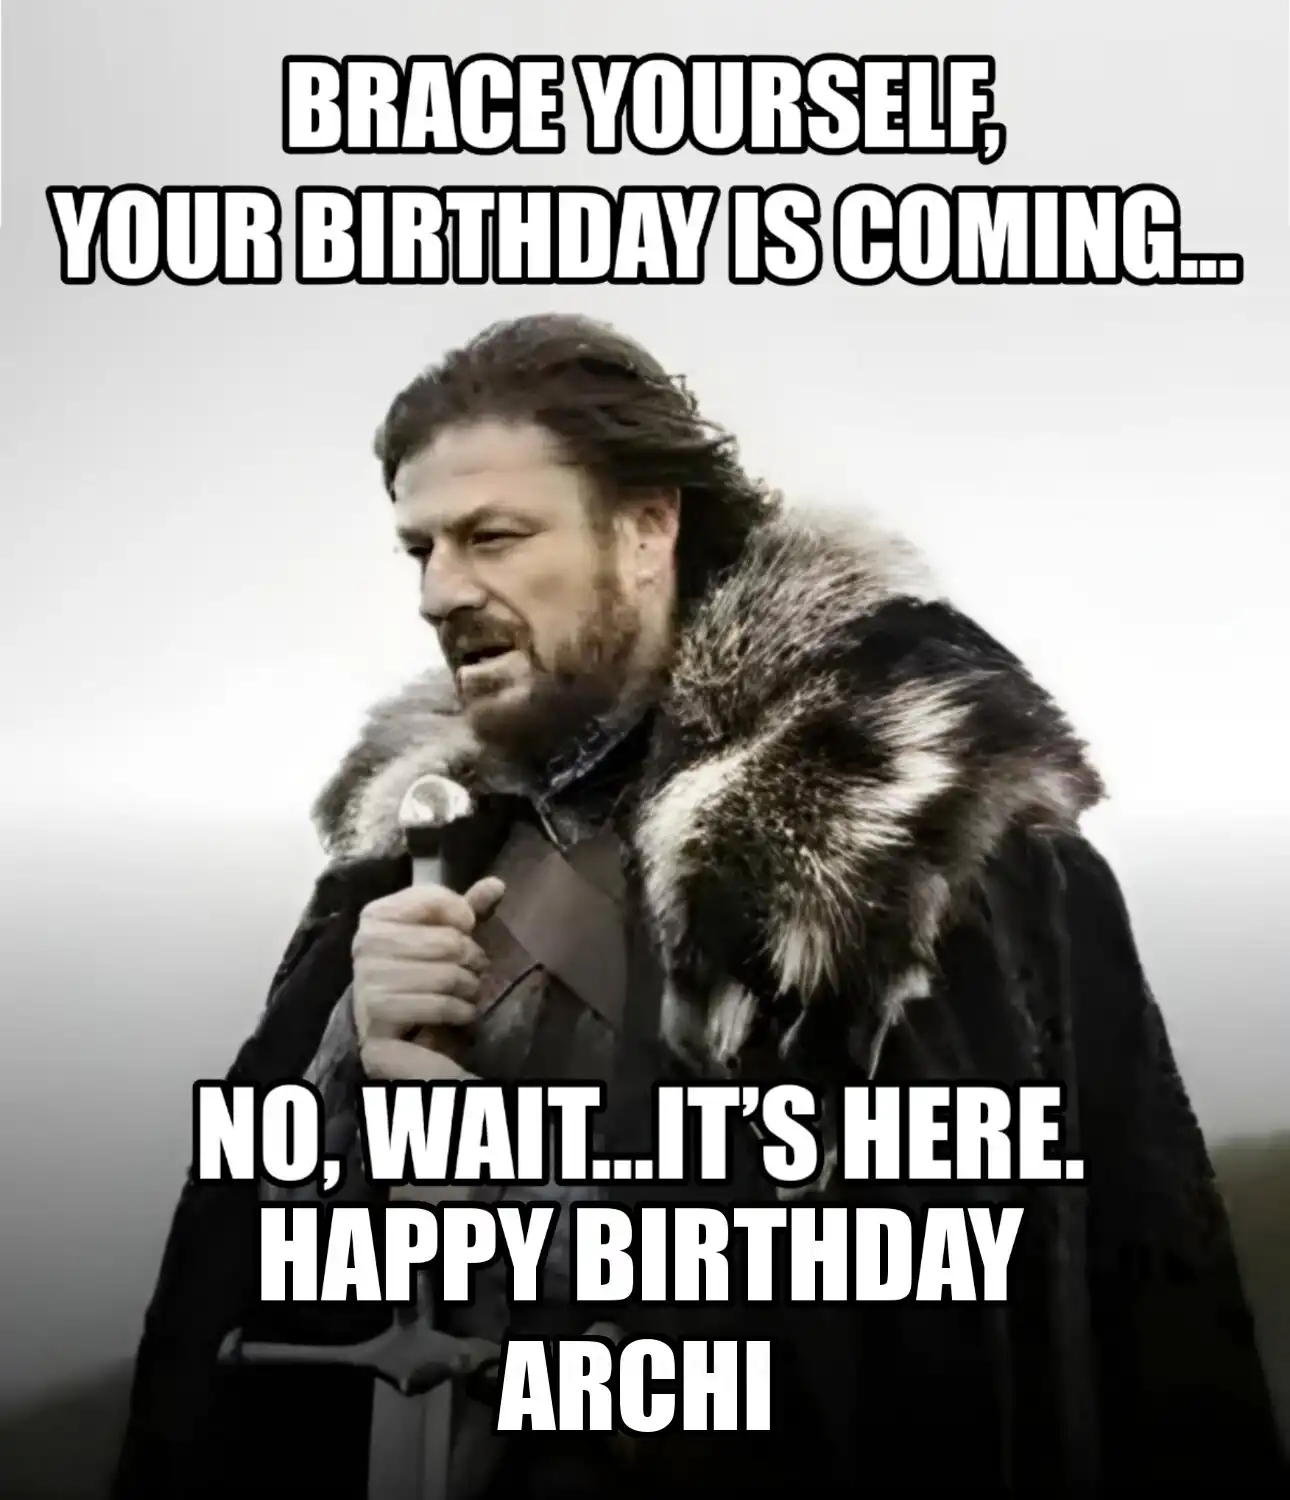 Happy Birthday Archi Brace Yourself Your Birthday Is Coming Meme